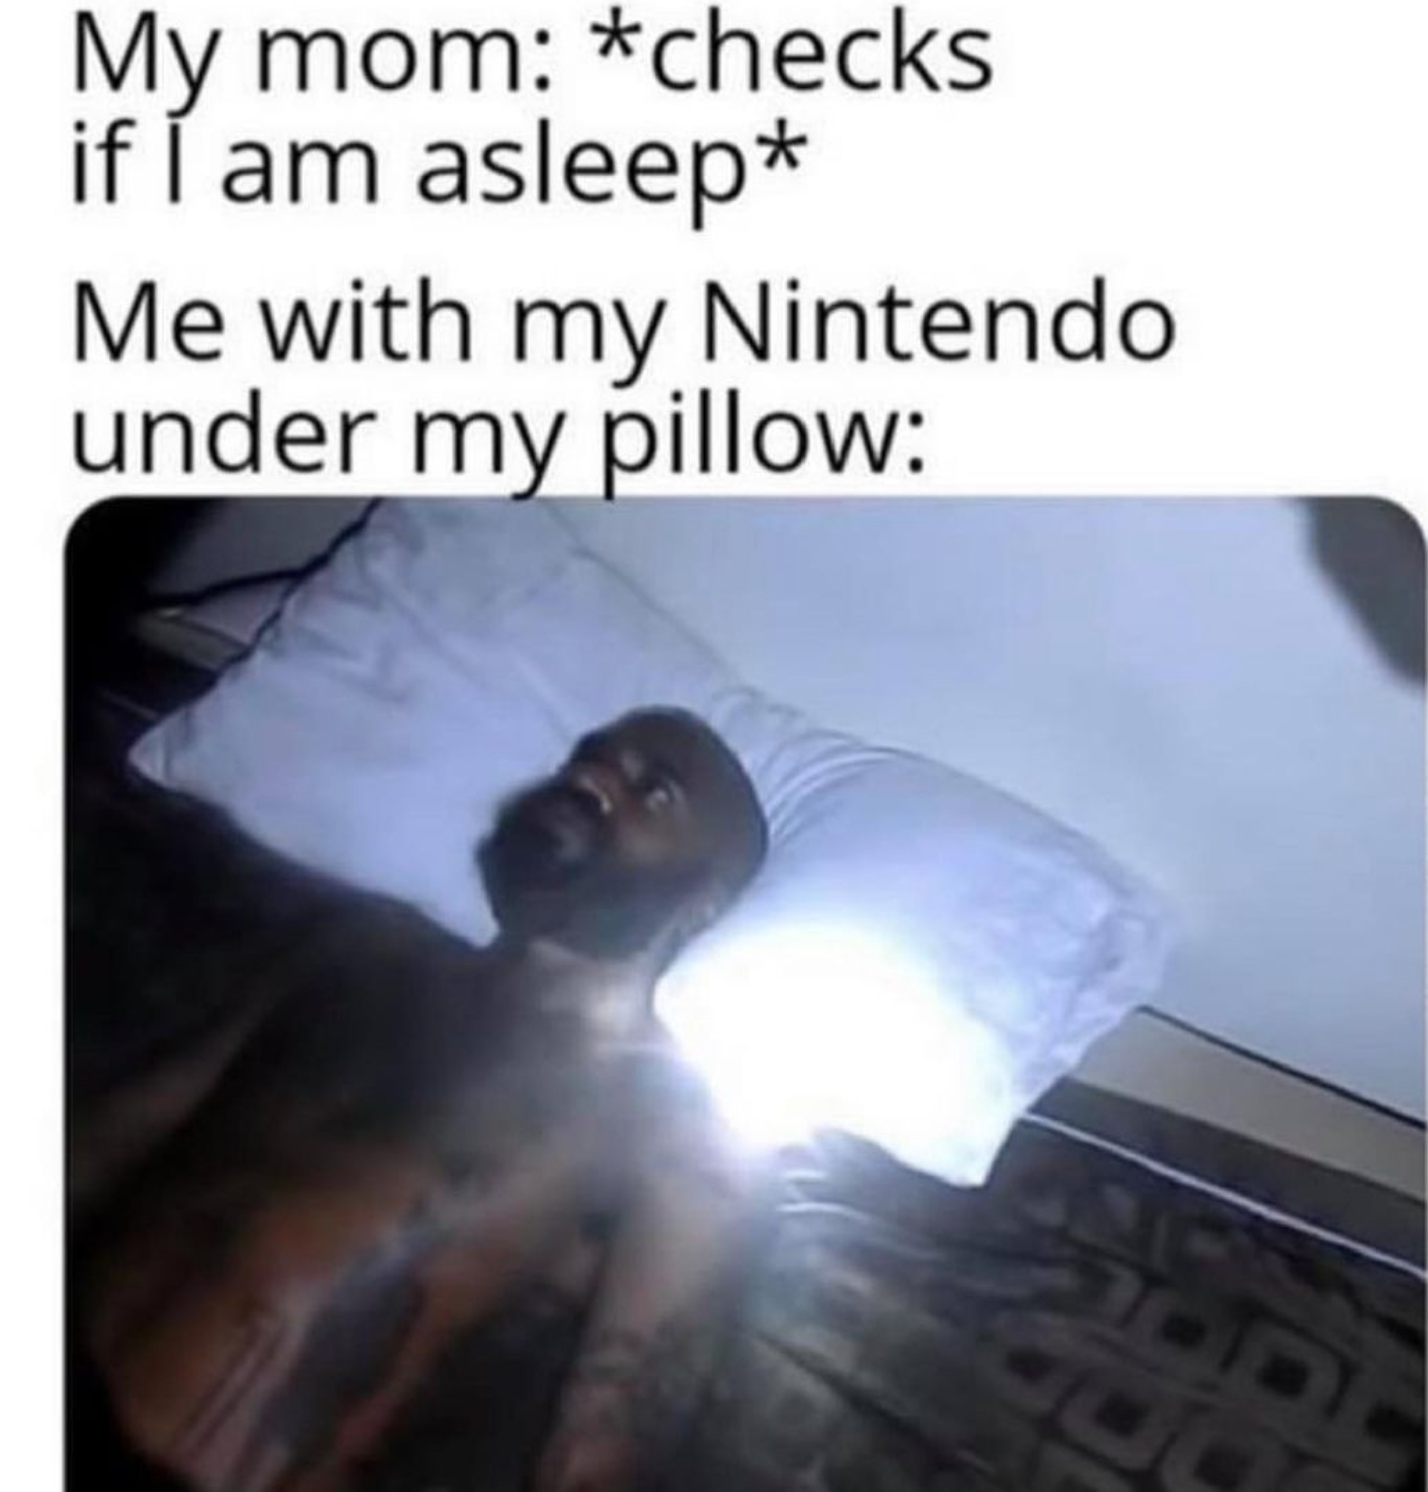 funny gaming memes - photograph - My mom checks if I am asleep Me with my Nintendo under my pillow